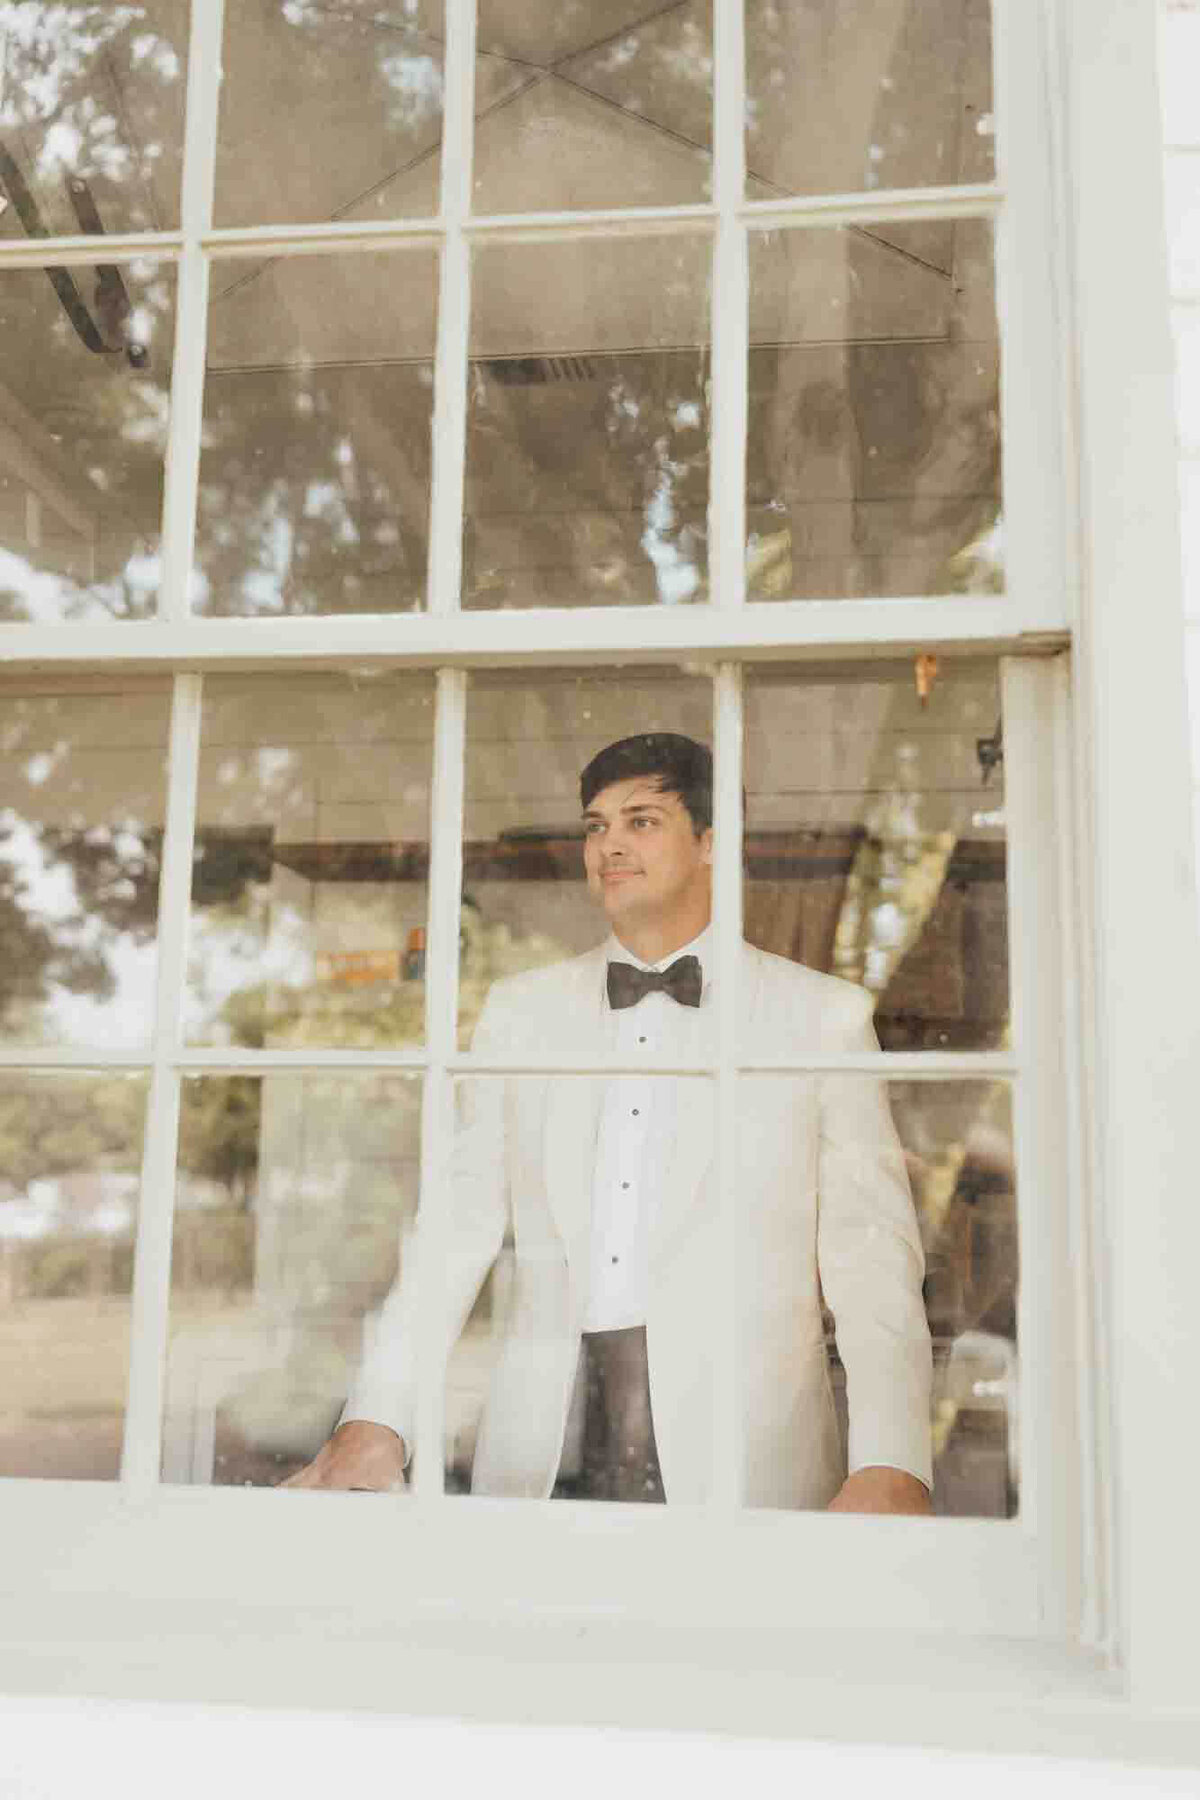 groom looks out of a window on his wedding day, wearing his suit and tie.